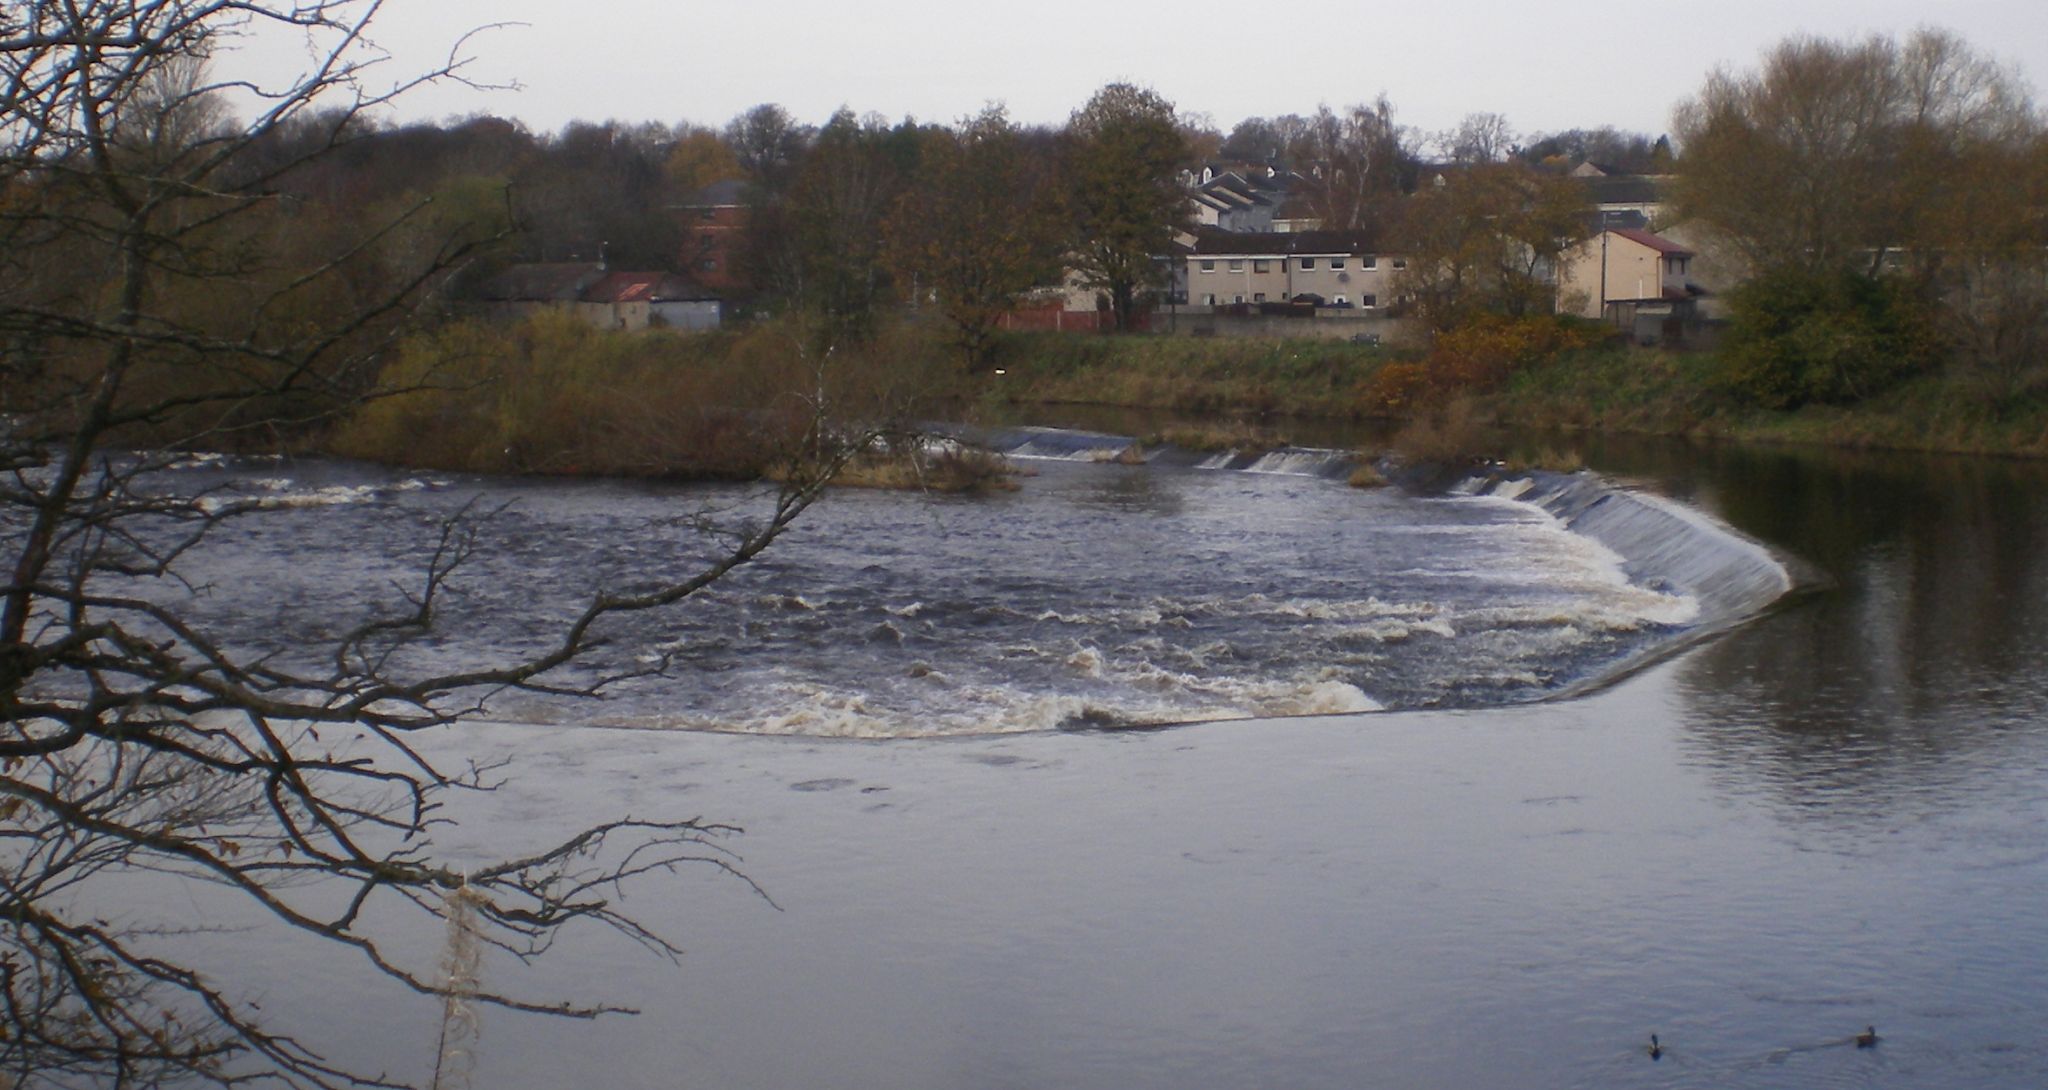 Weir on the River Clyde at Carmyle